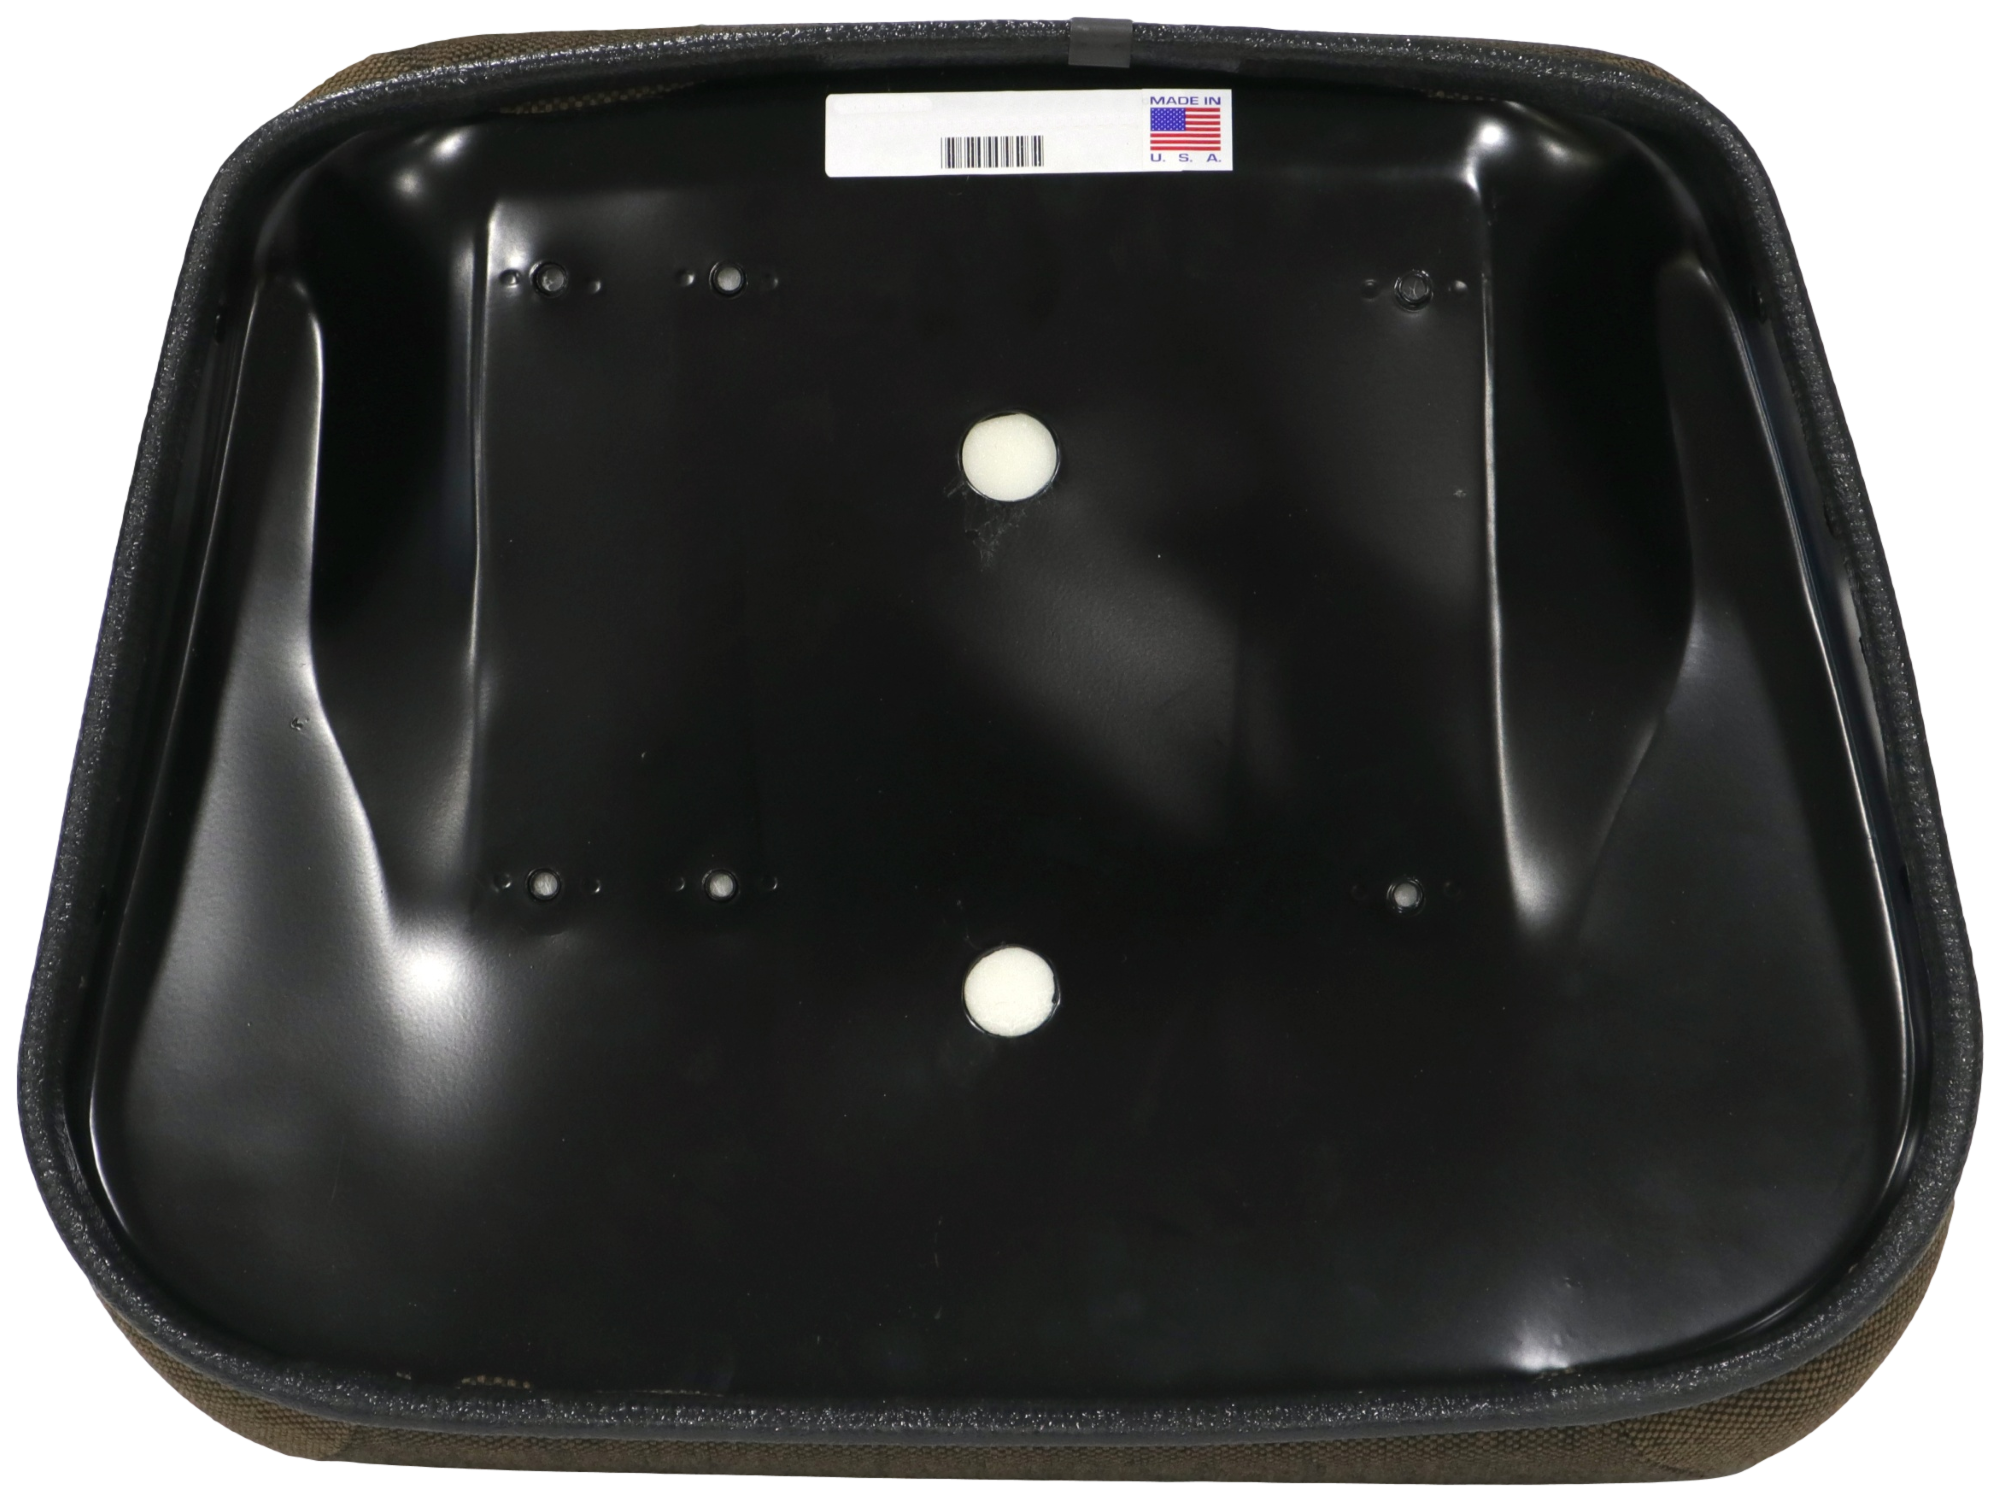 Seat Cushion Set (2 color options) Hydraulic or Mechanical Suspension, IH  756 766 826 856 966 1066 1256 1456 1466 1468 1566 1568 - Redrunrite